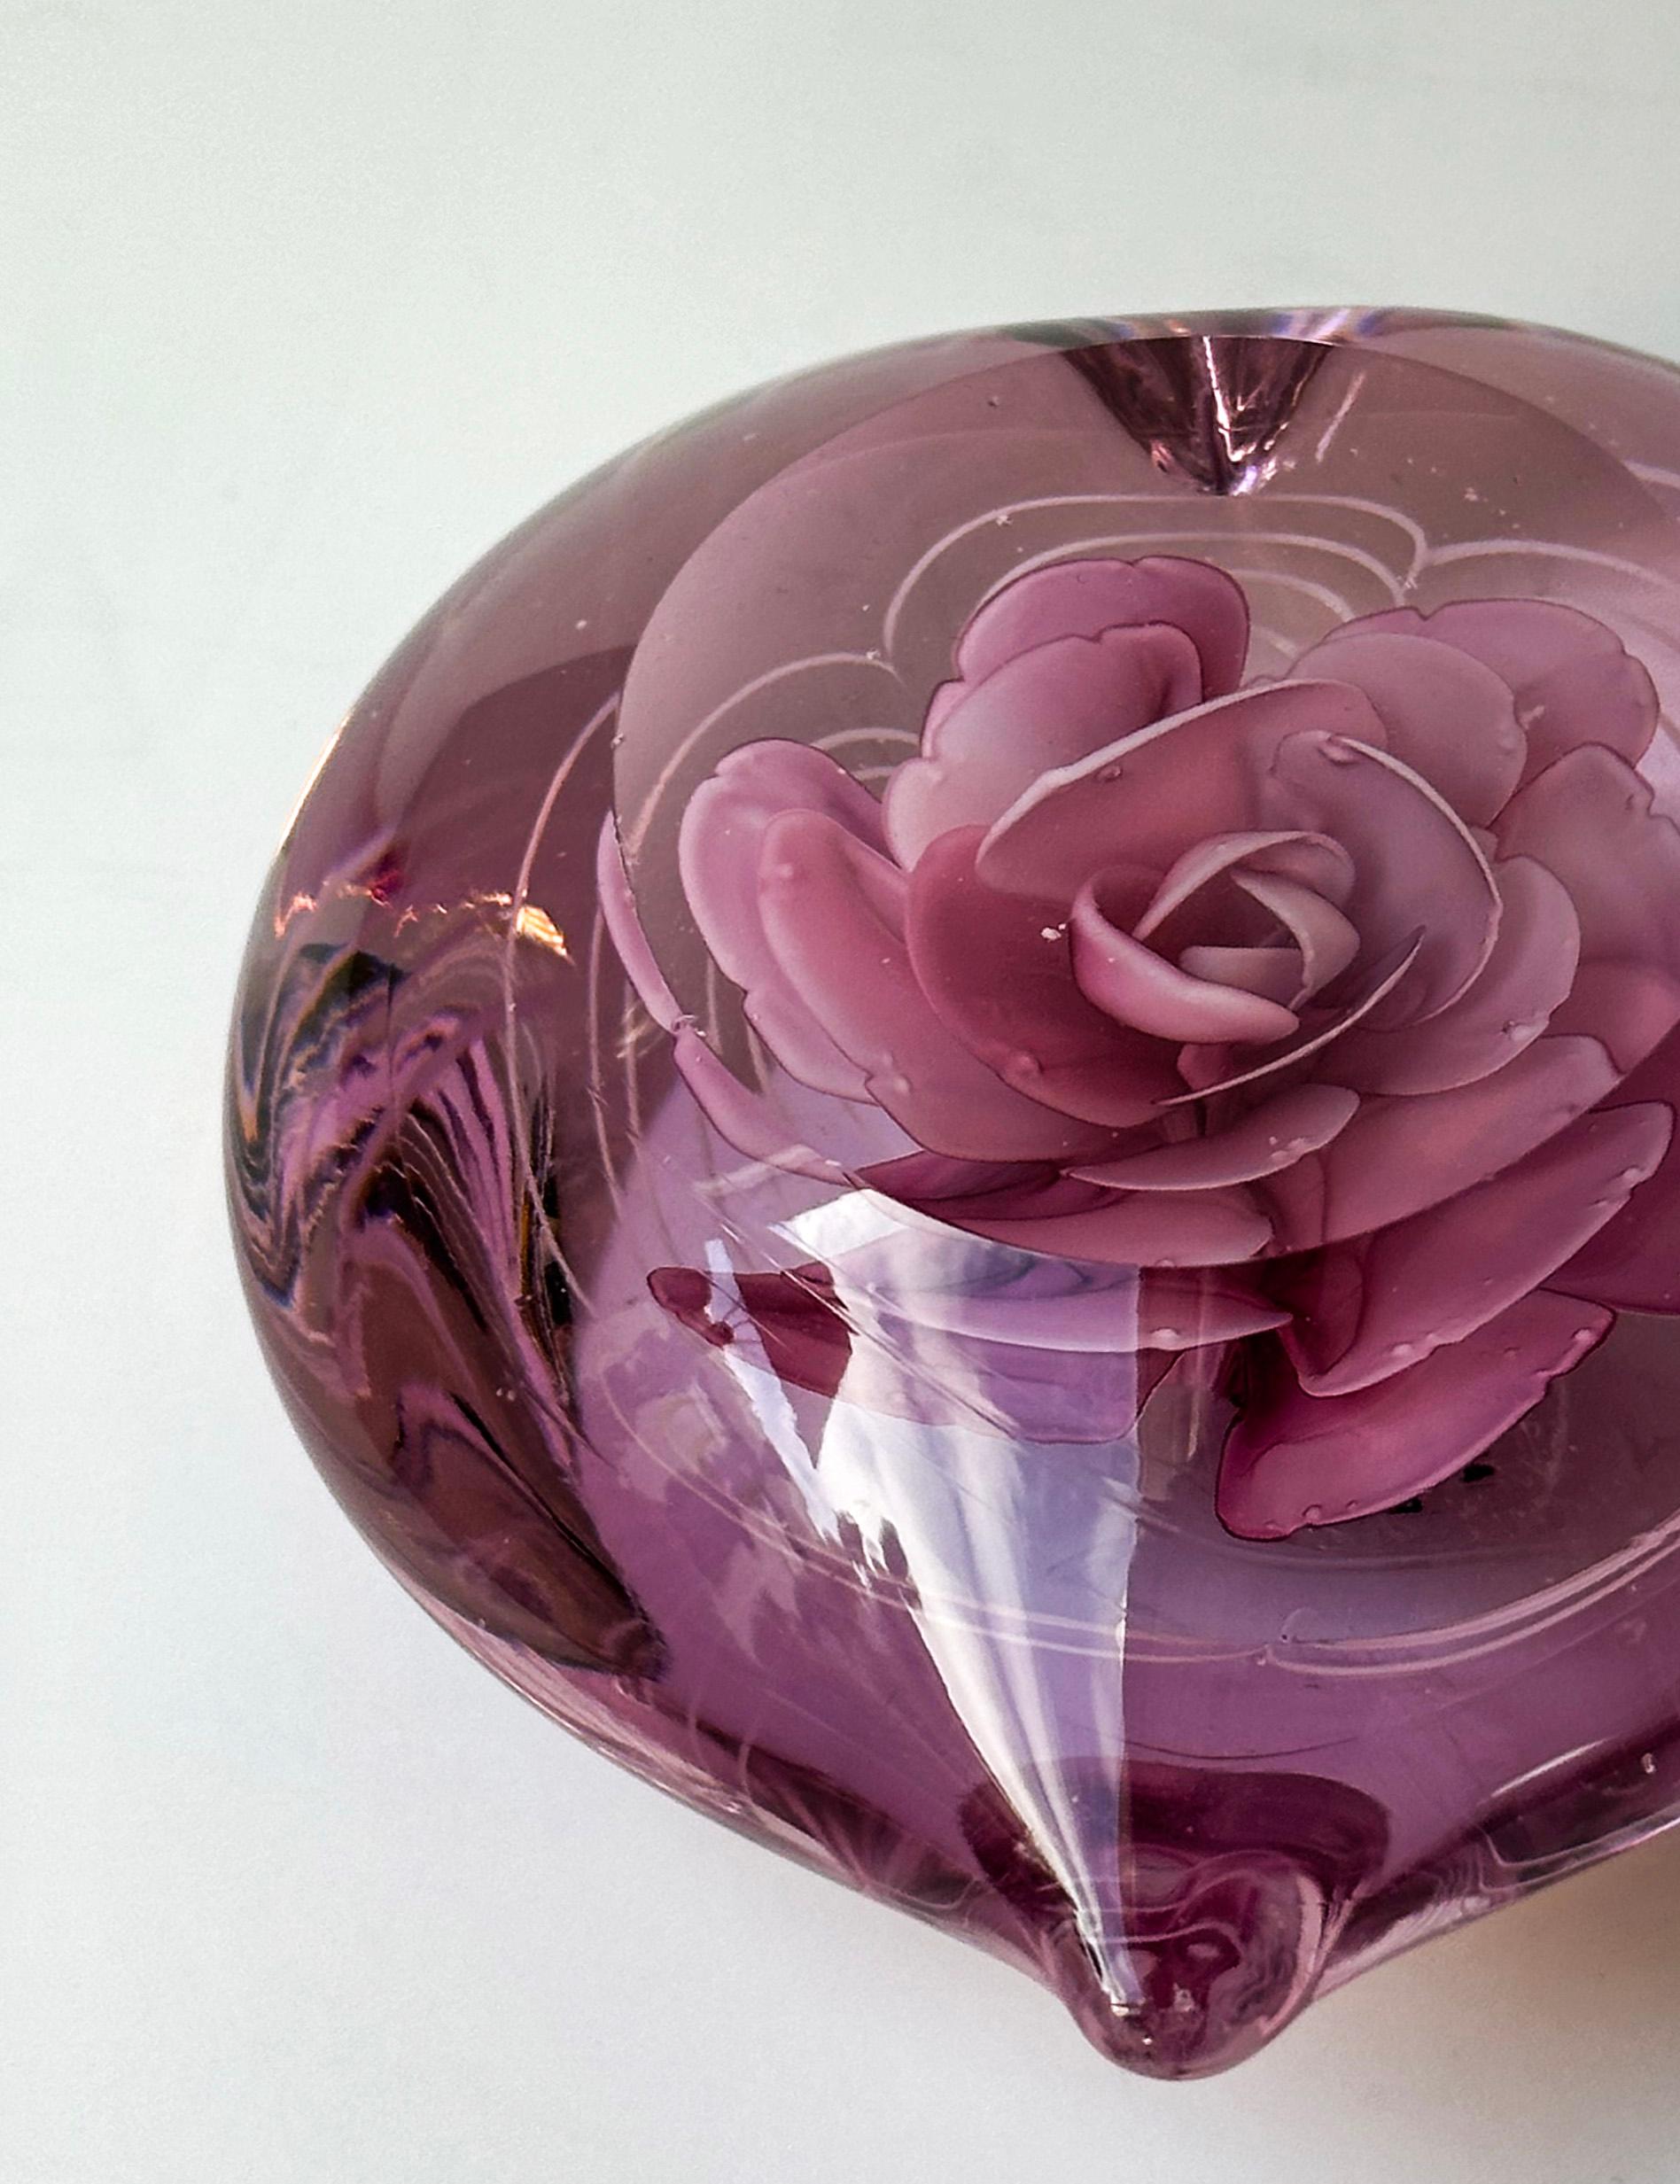 This vintage pink glass paperweight, meticulously crafted and shaped in the form of a love heart, radiates charm with its brilliantly bright pink glass. Encased within are delicate glass rose petals, framed by finely looped lines, showcasing an